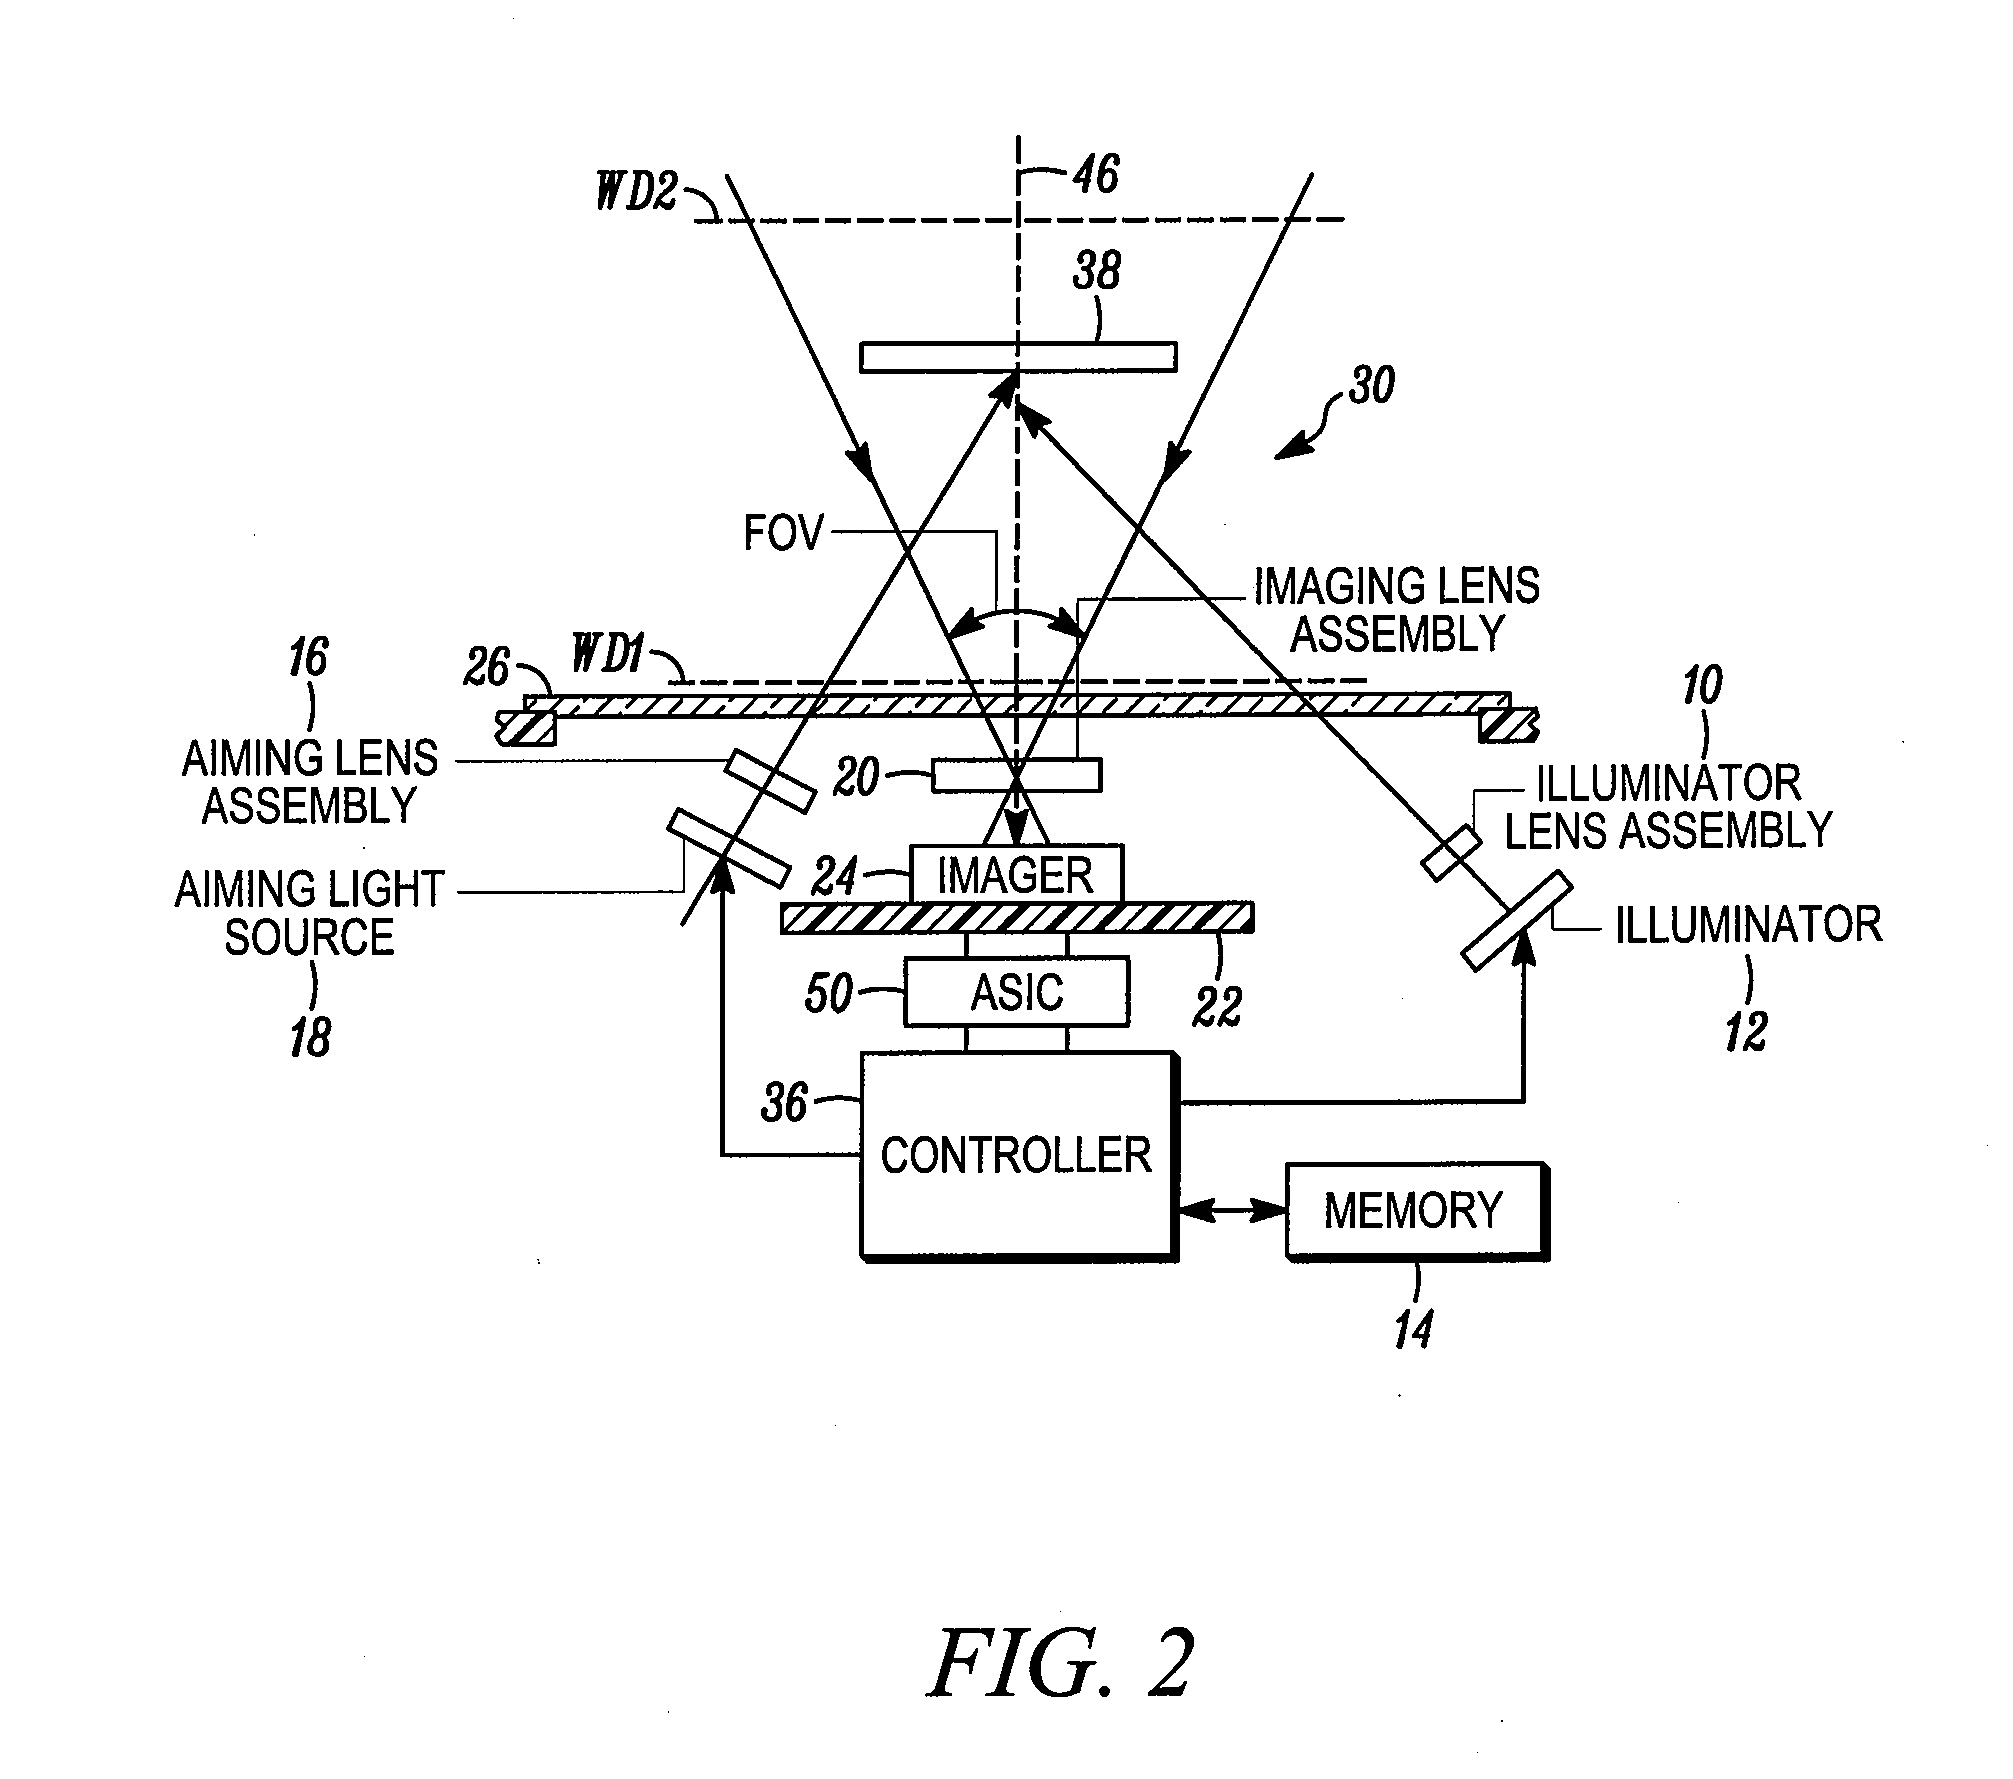 Method and apparatus for capturing images with variable sizes